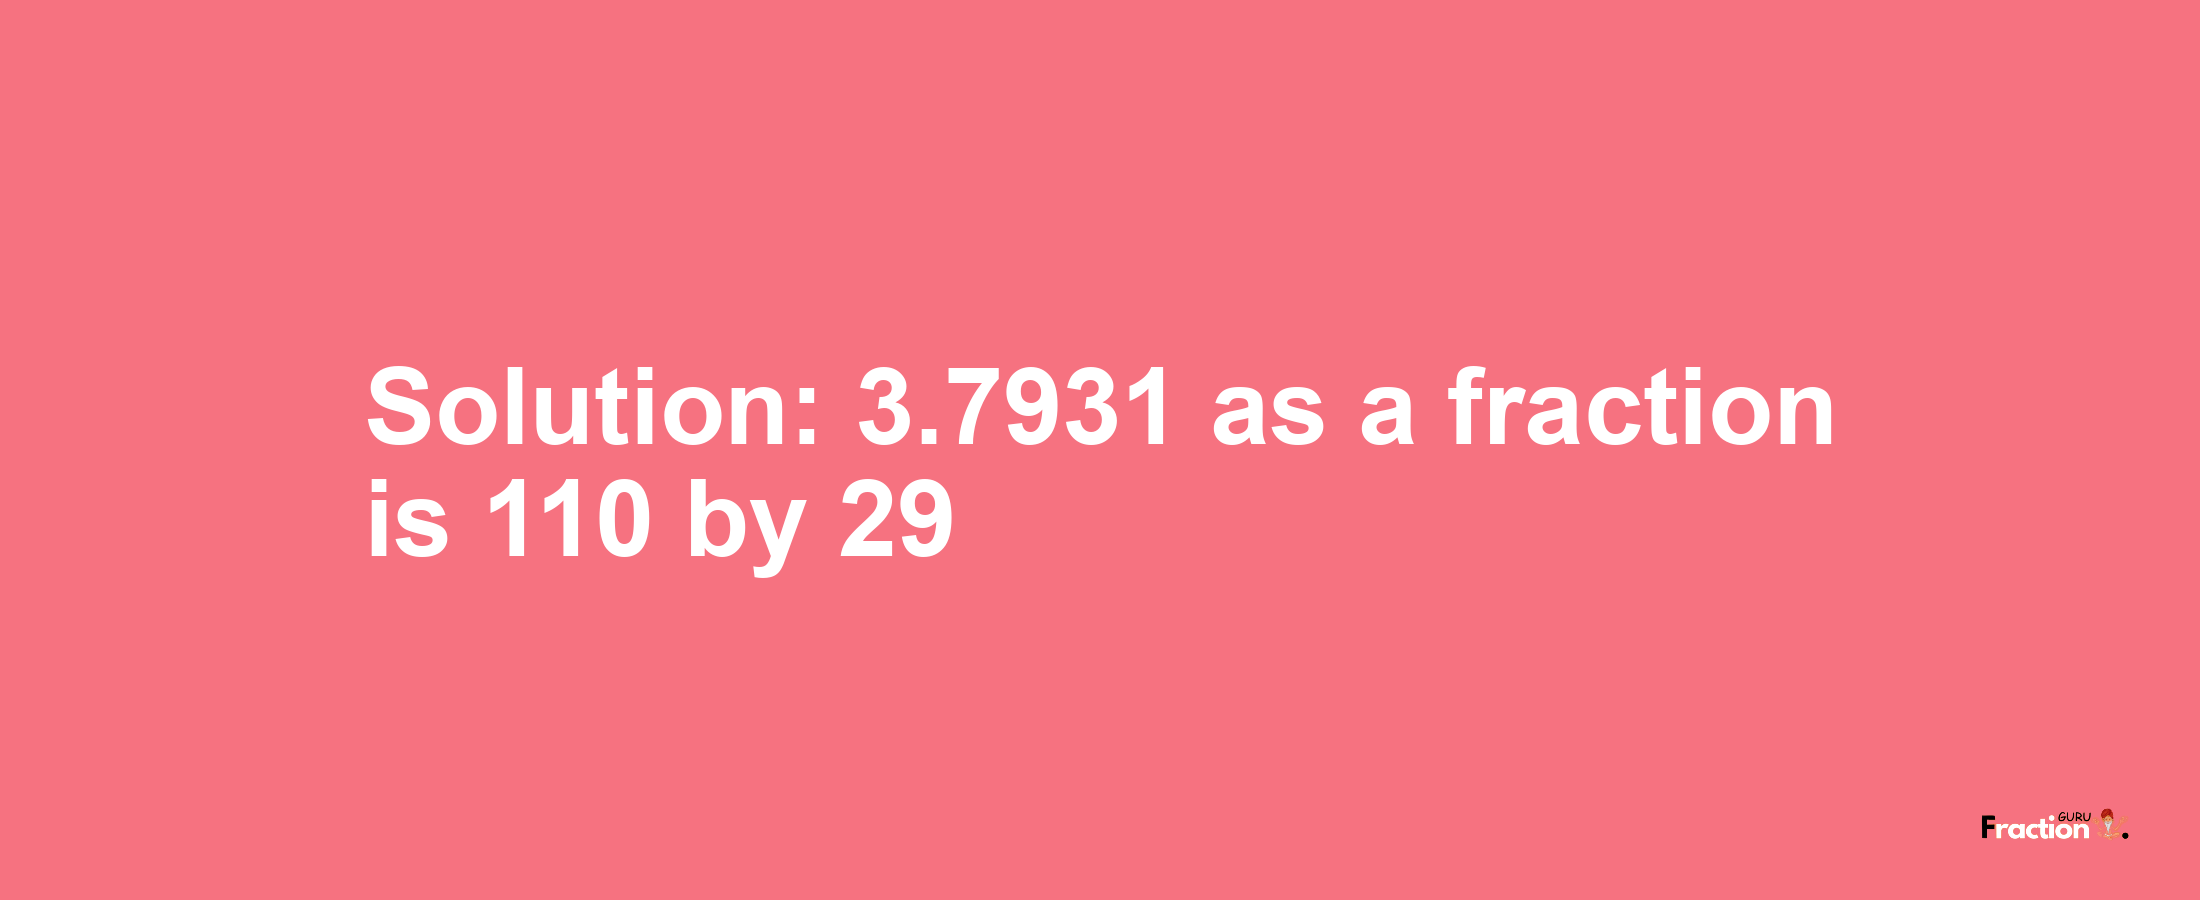 Solution:3.7931 as a fraction is 110/29